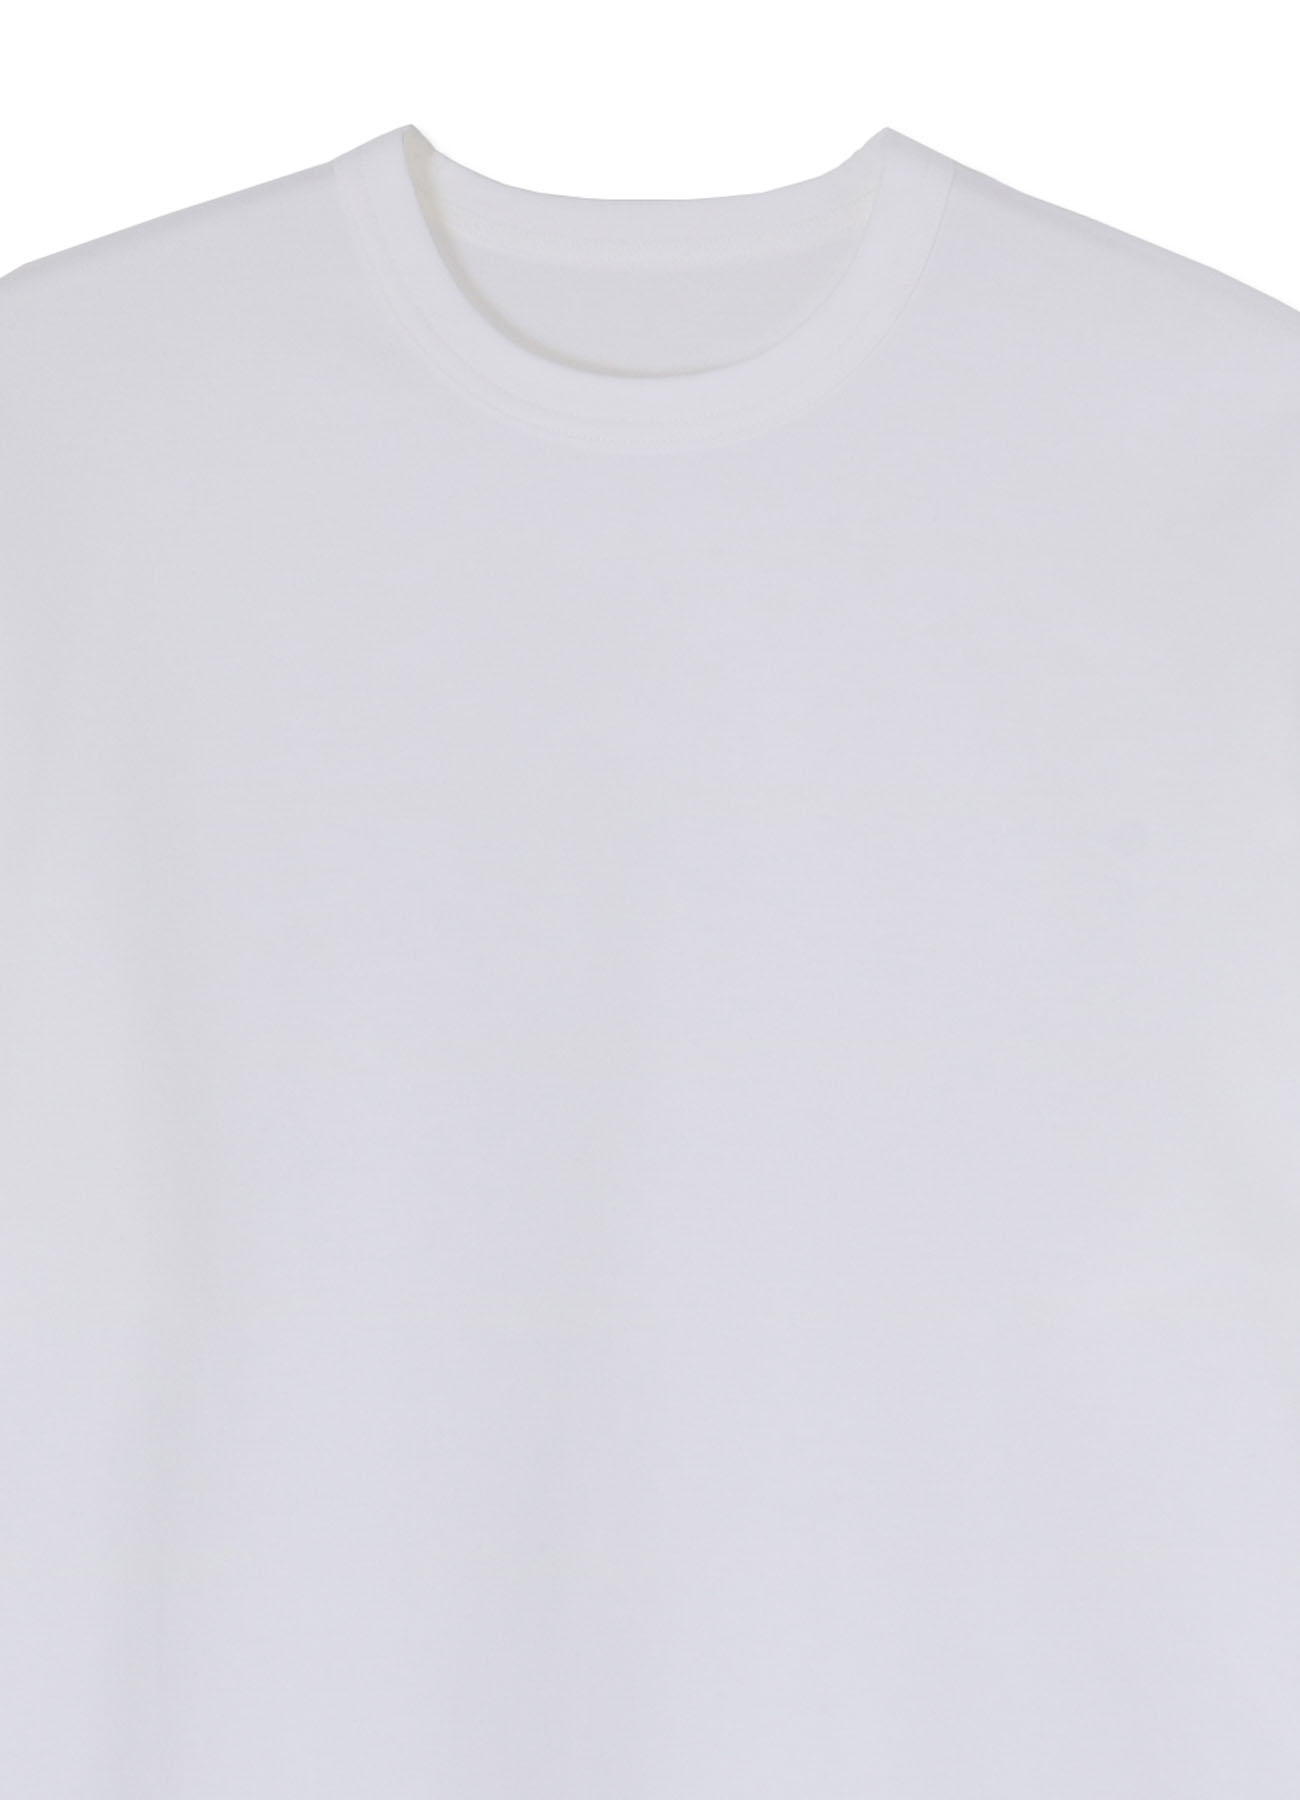 40/2 COTTON JERSEY LONG SLEEVE SHIRT (M)(M White): Y's for living